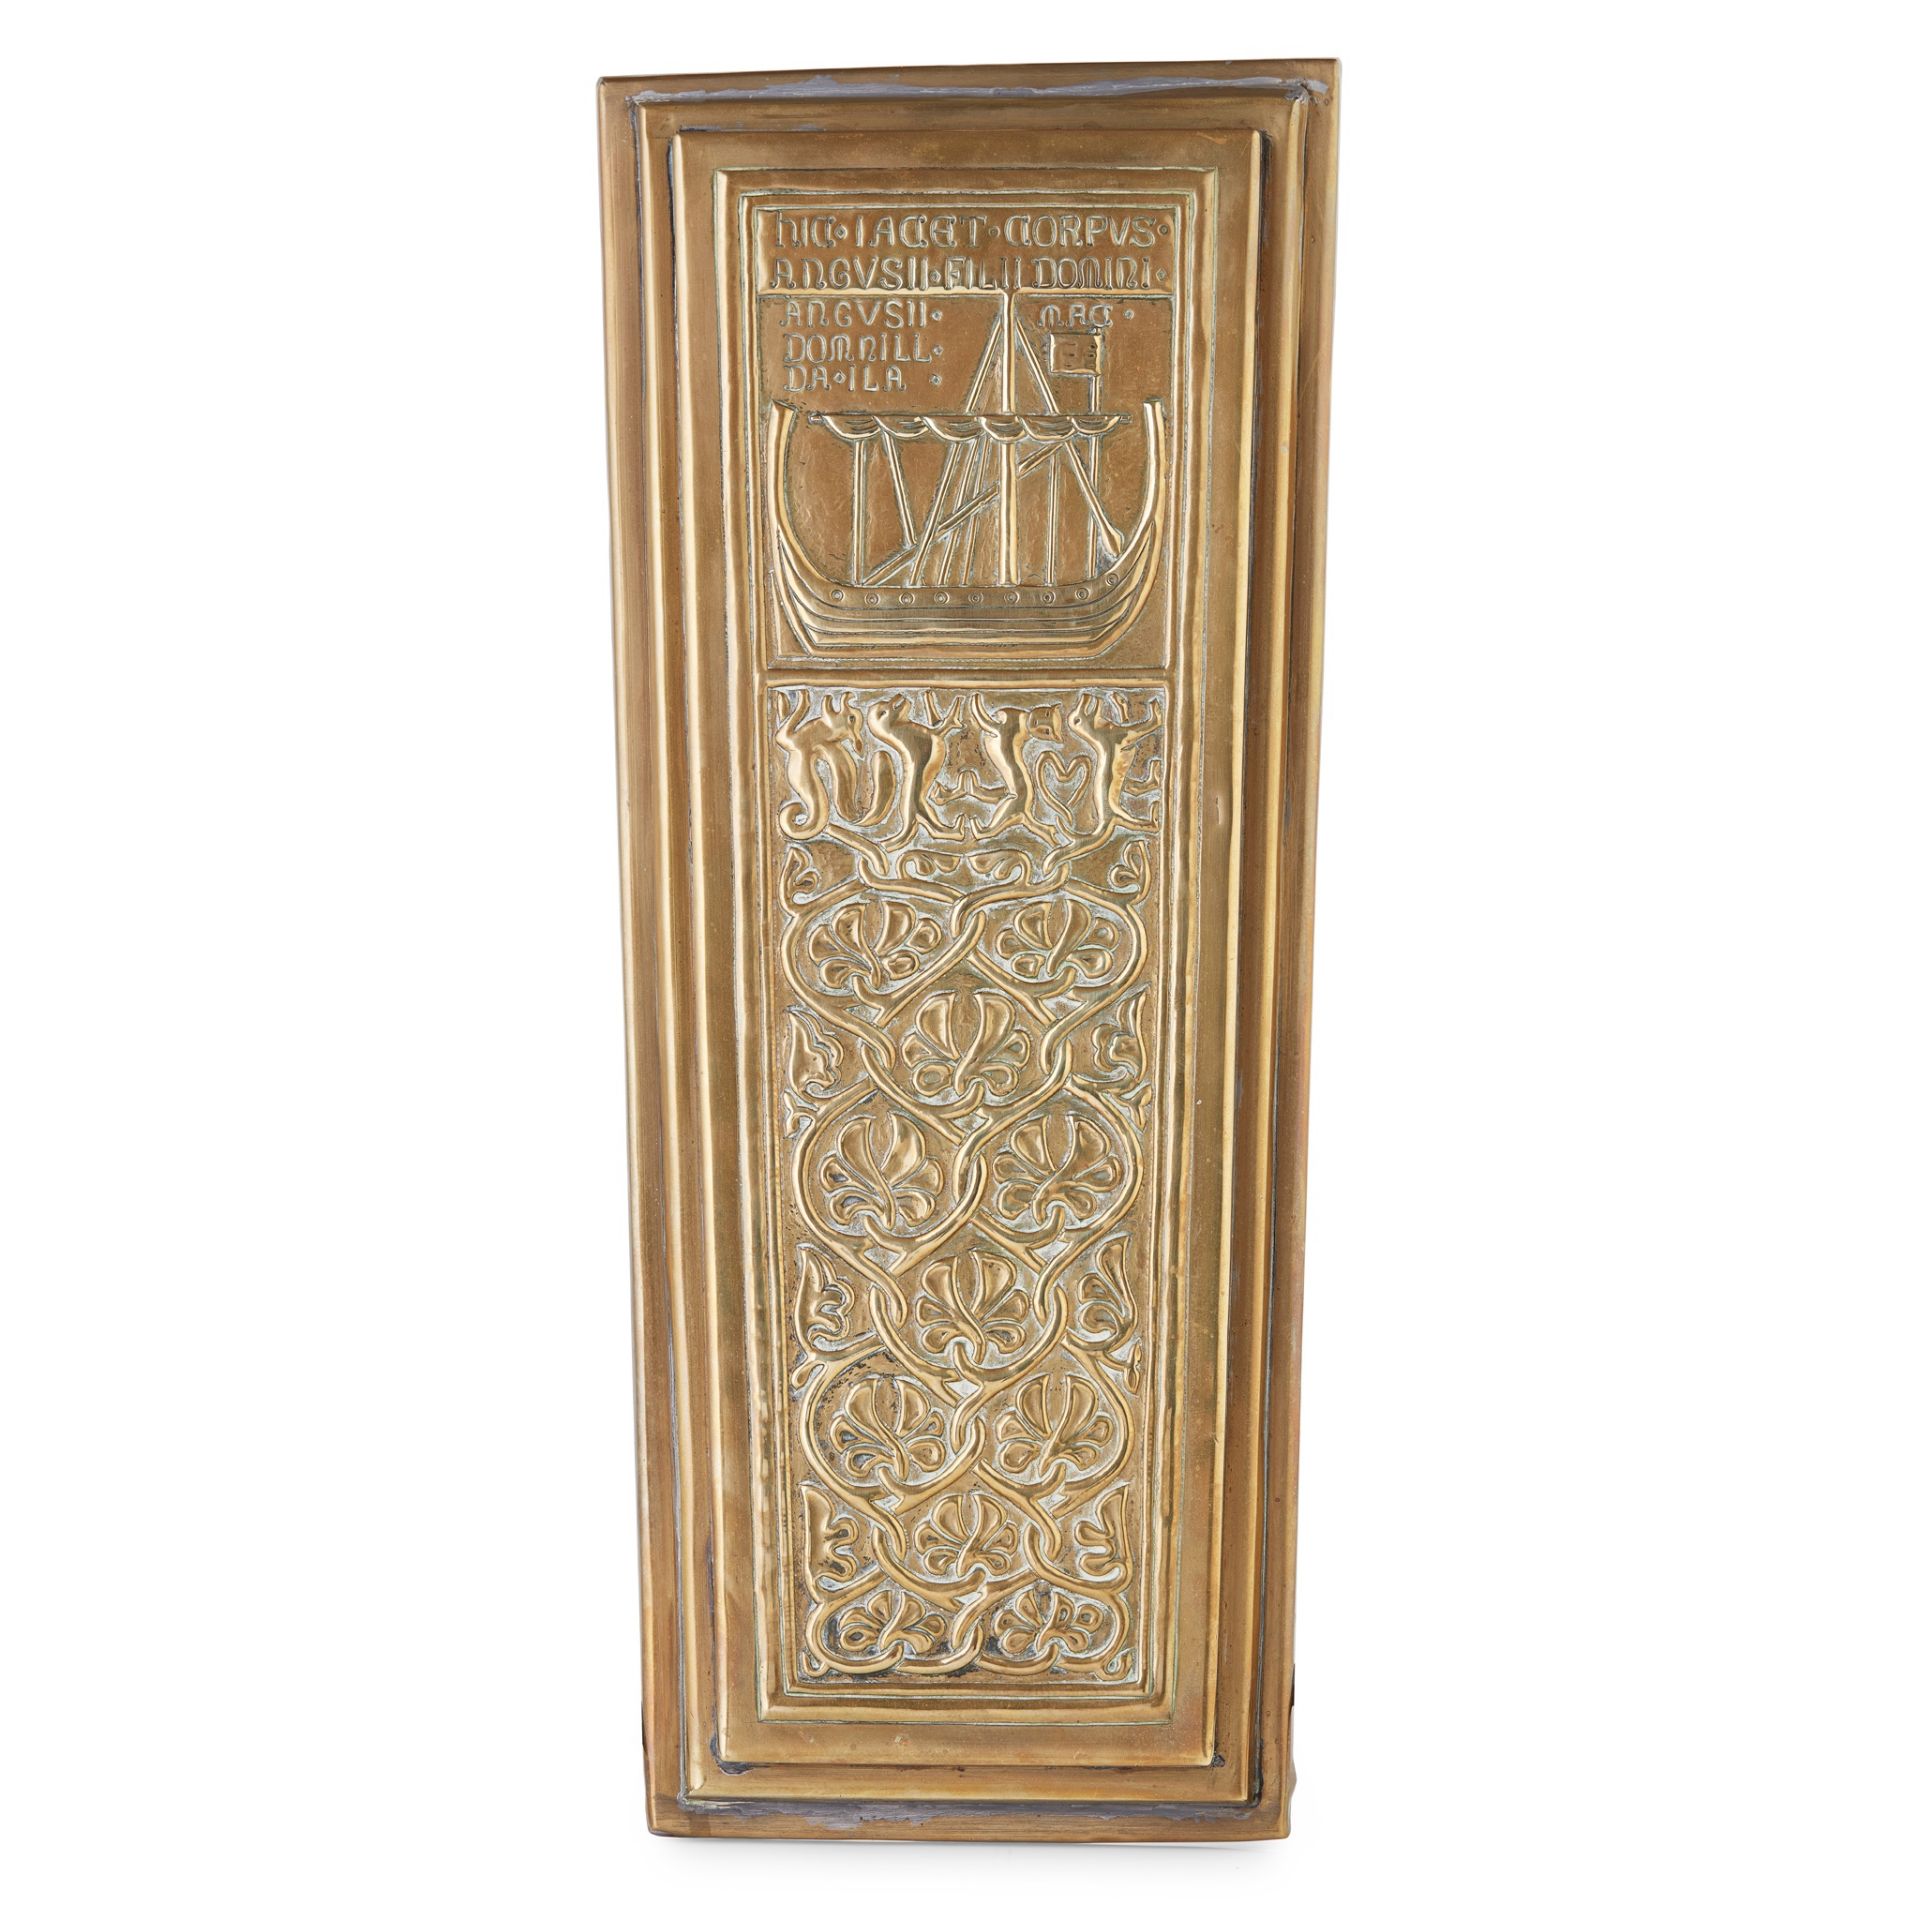 IONA- A SCARCE BRASS WALL PLAQUE ALEXANDER RITCHIE